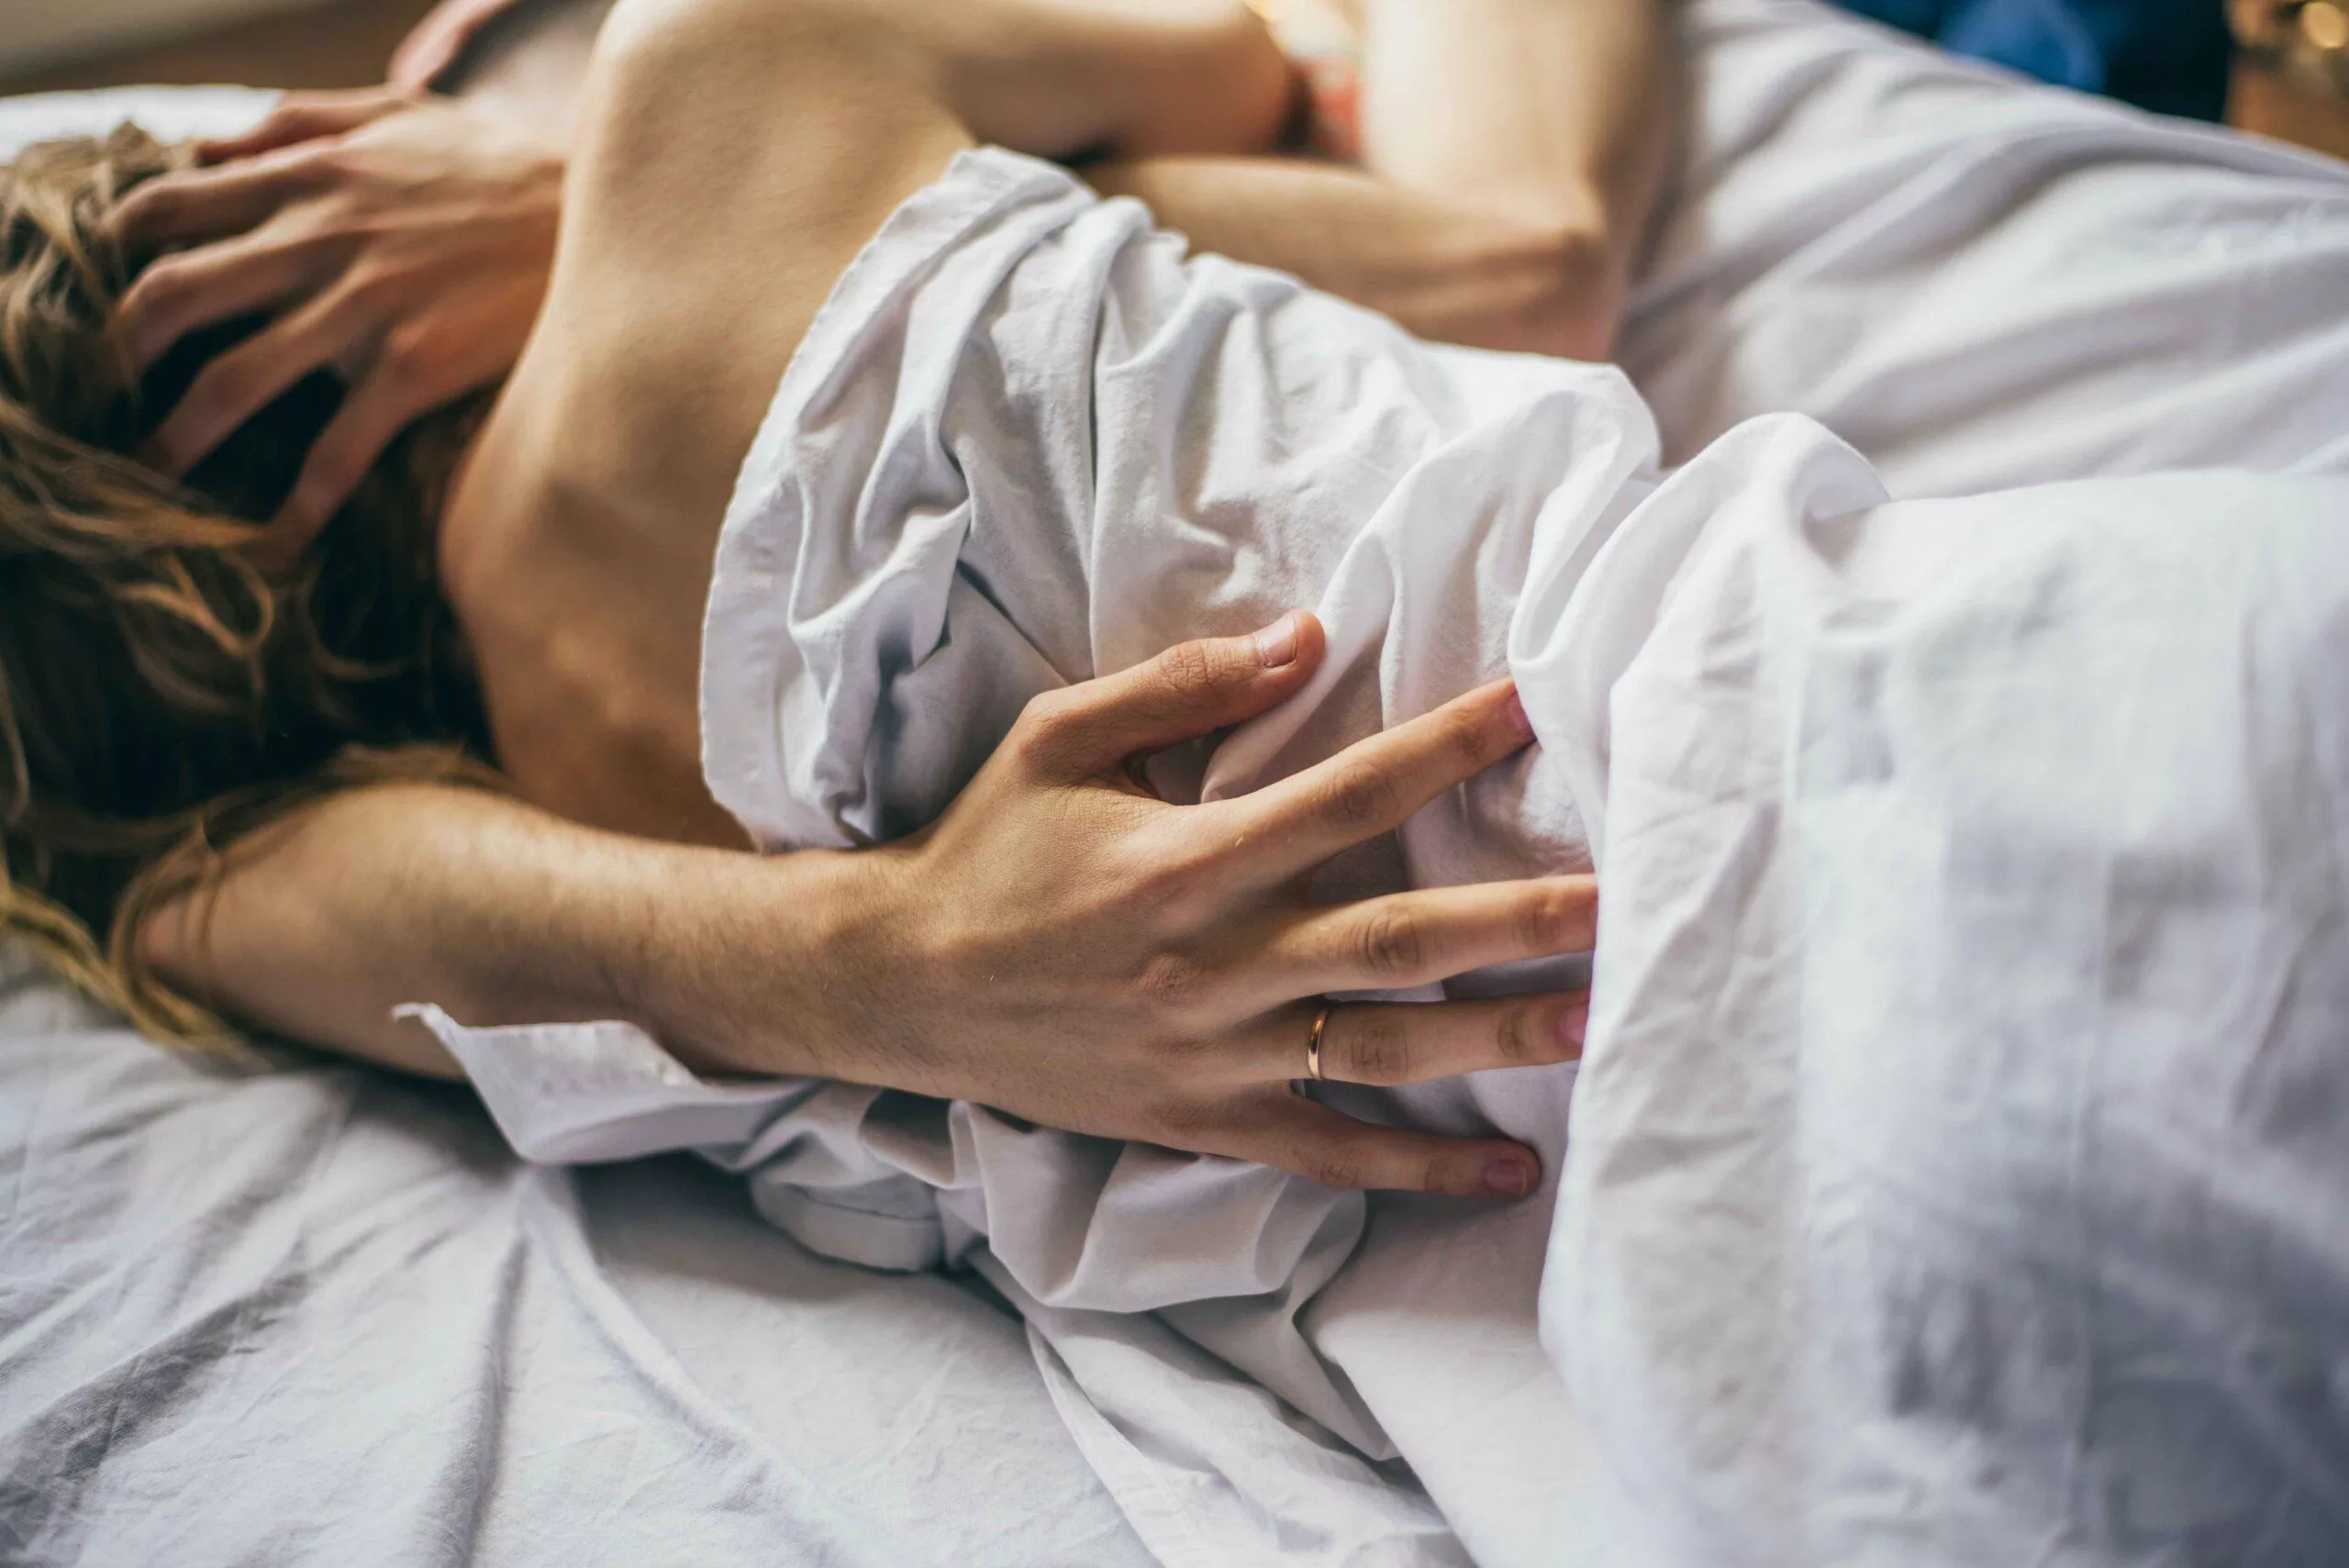 If Your Sex Life is Stale, It's Probably Missing This Key Ingredient